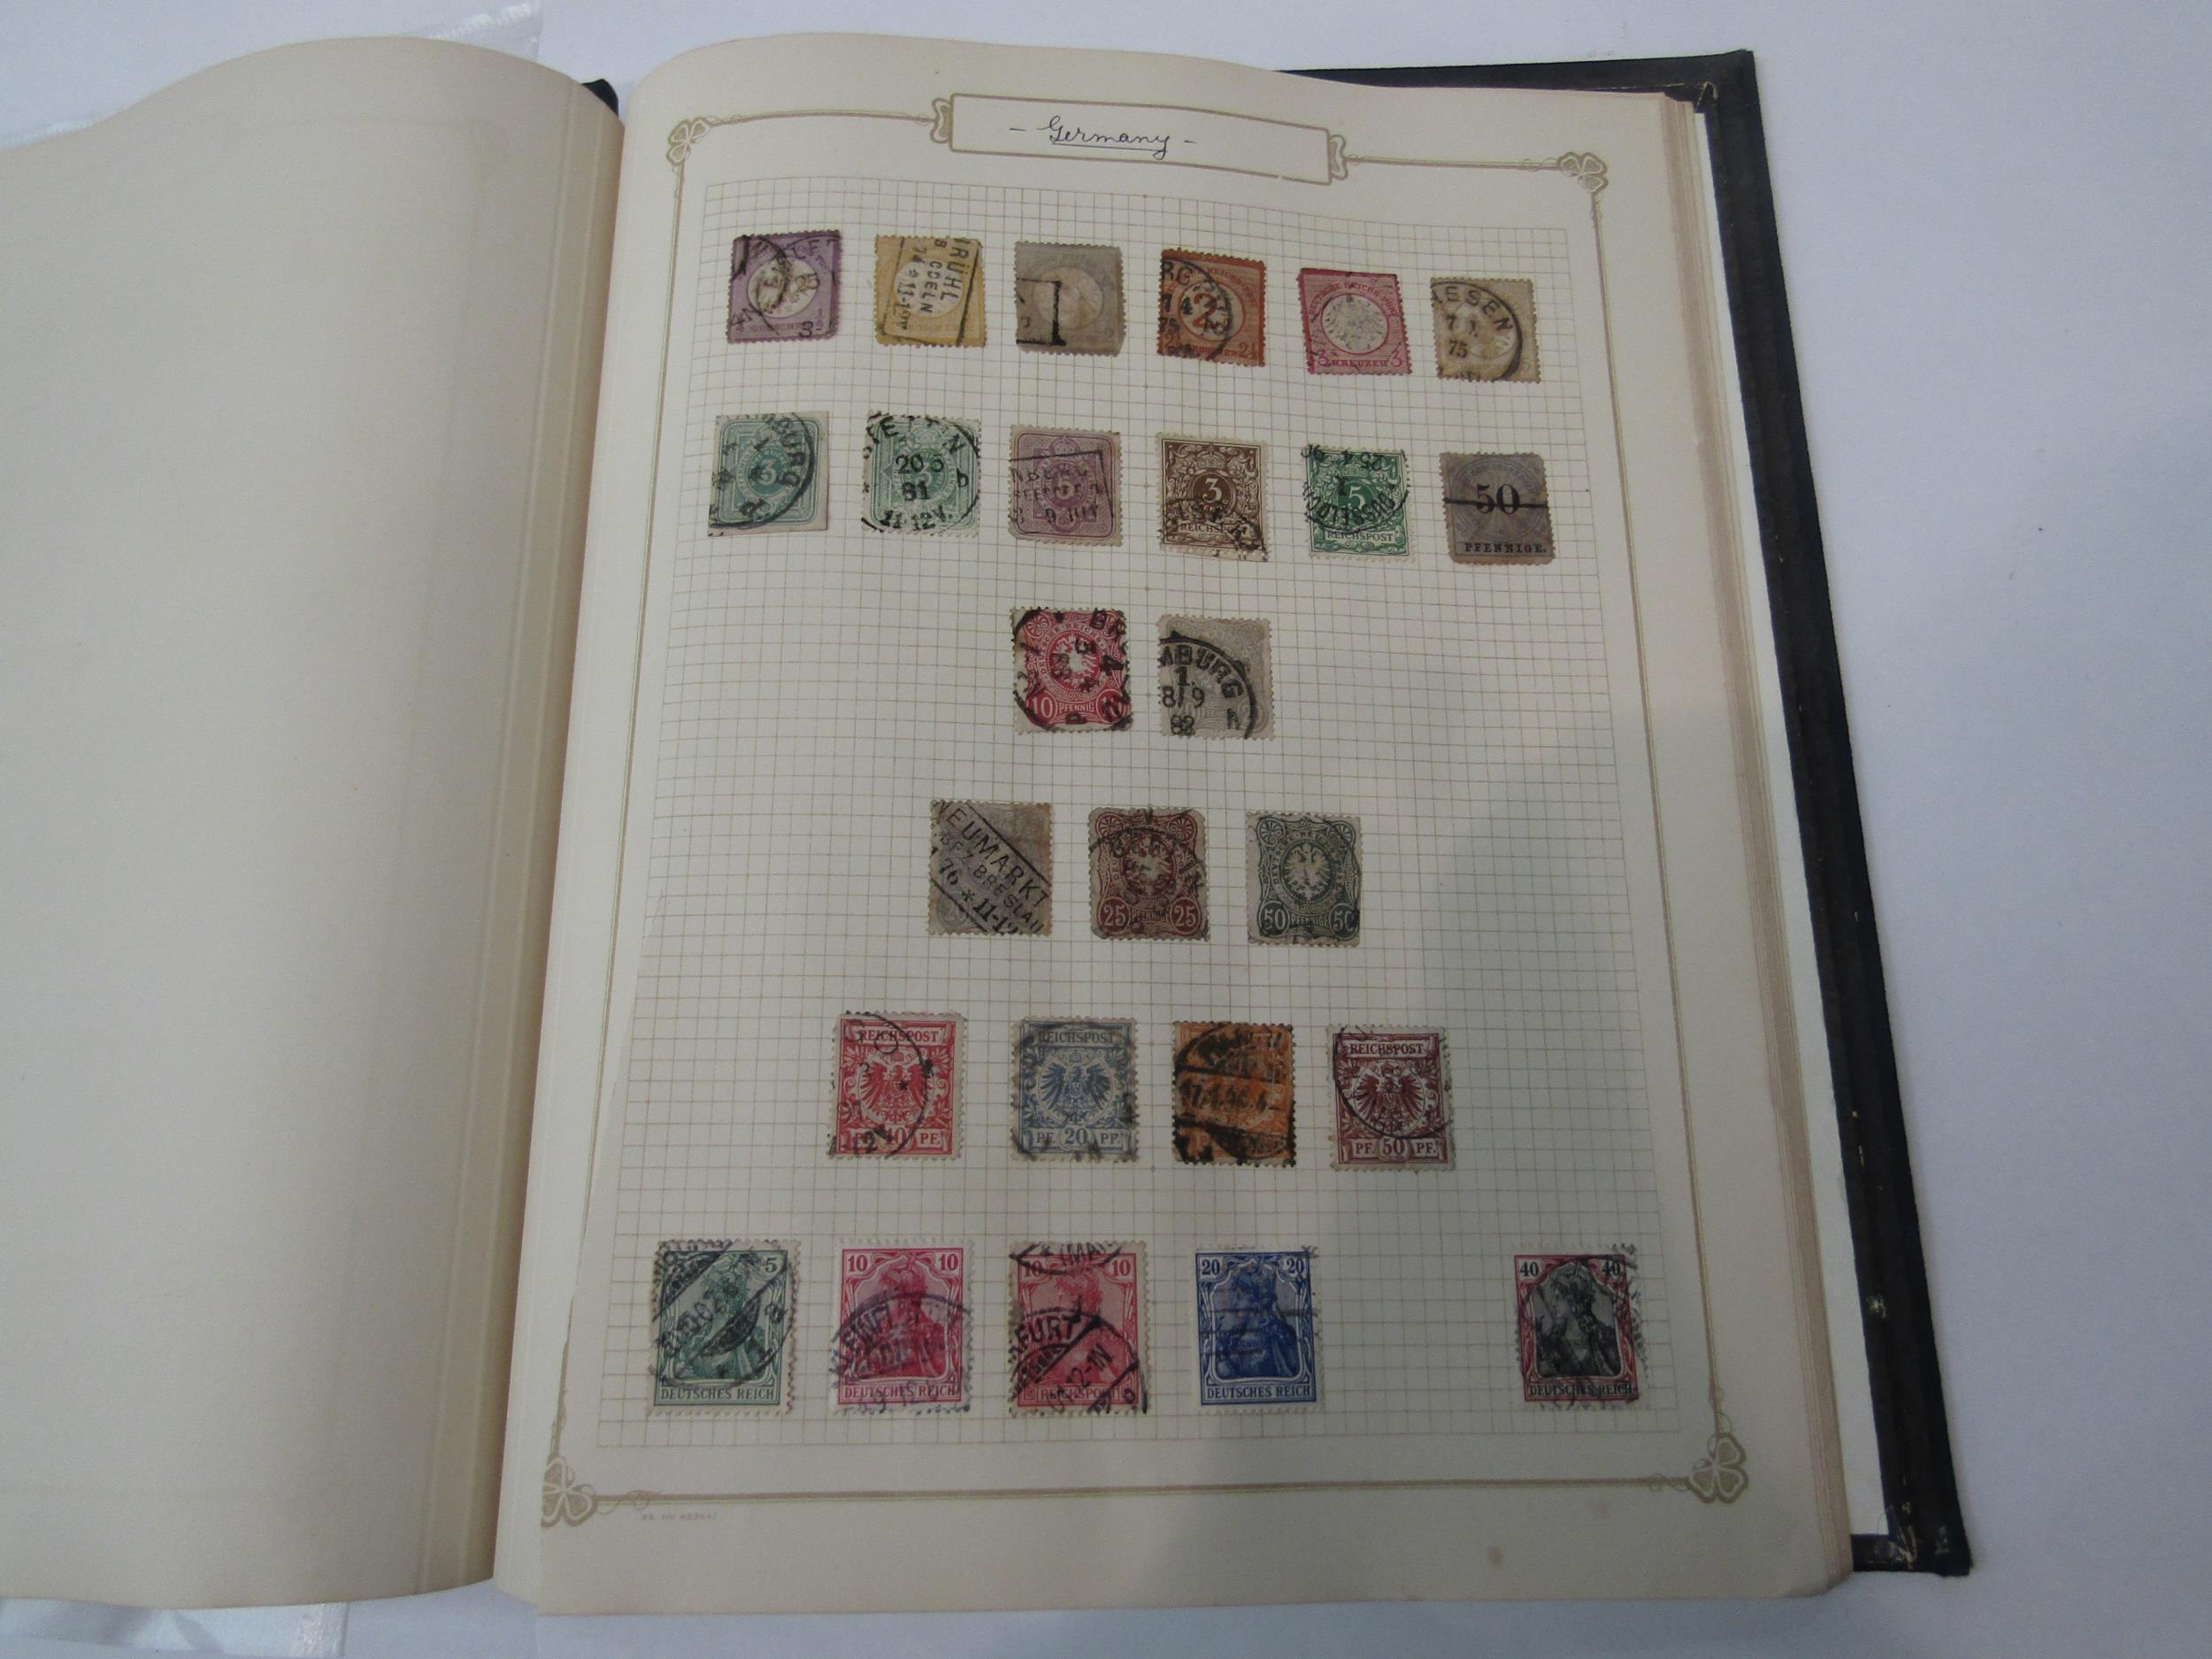 A stamp album containing World stamps including Great Britain penny black, India, Brazil, etc and - Image 3 of 3